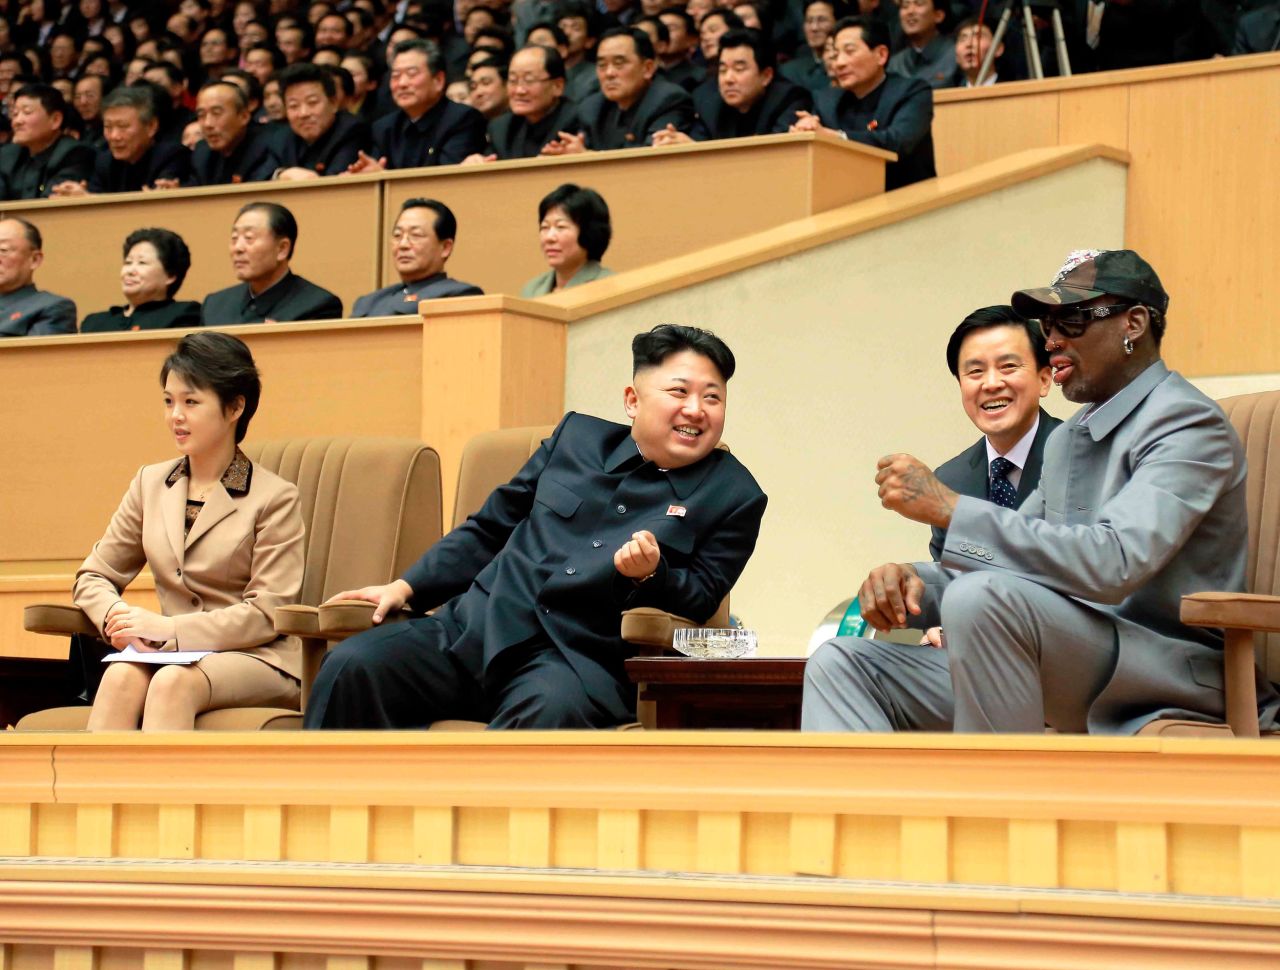 In January 2014, Kim hosted basketball legend Dennis Rodman and other former NBA players who were taking on North Koreans in an exhibition game. Kim grew up a massive basketball fan, and he and Rodman struck up a friendship. This was Rodman's fourth visit to North Korea, and he called <a href="https://www.cnn.com/2014/01/08/world/gallery/rodman-north-korea-basketball-game/index.html" target="_blank">the game</a> "basketball diplomacy."